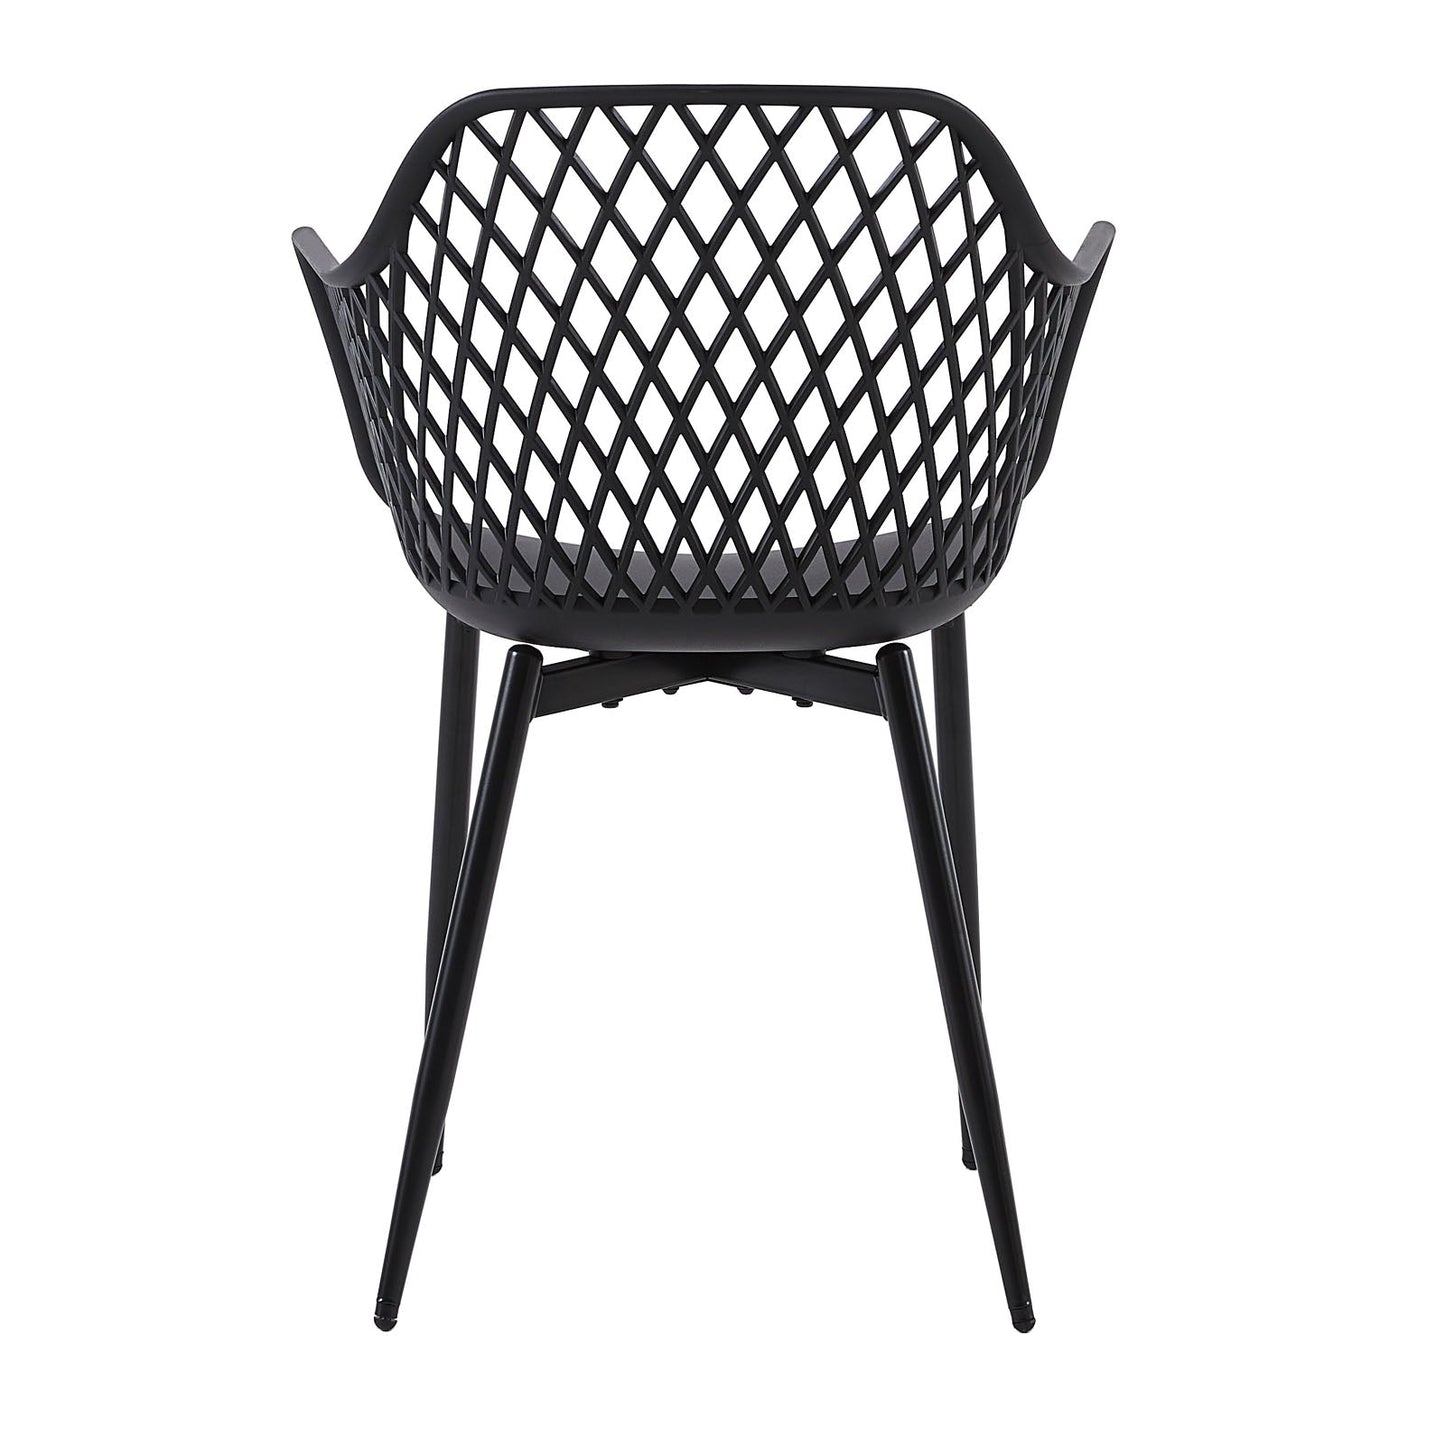 ROME Dining Chairs with Metal Legs, Retro Design Hollow Chair - Black